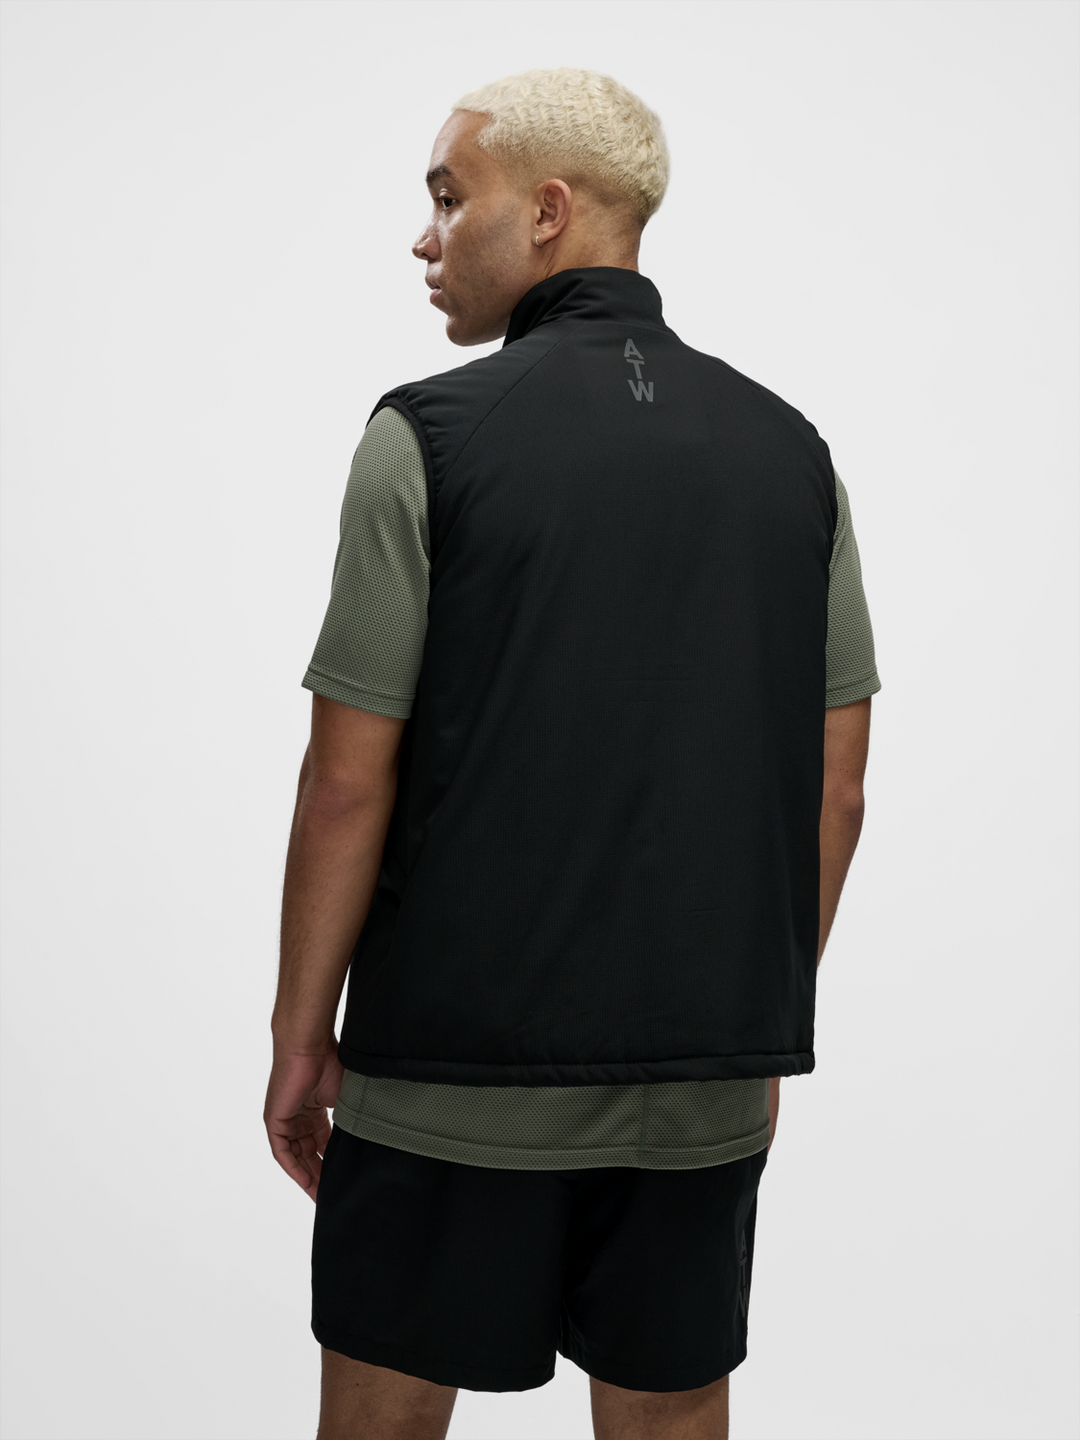 Halo Insulated Tech vest